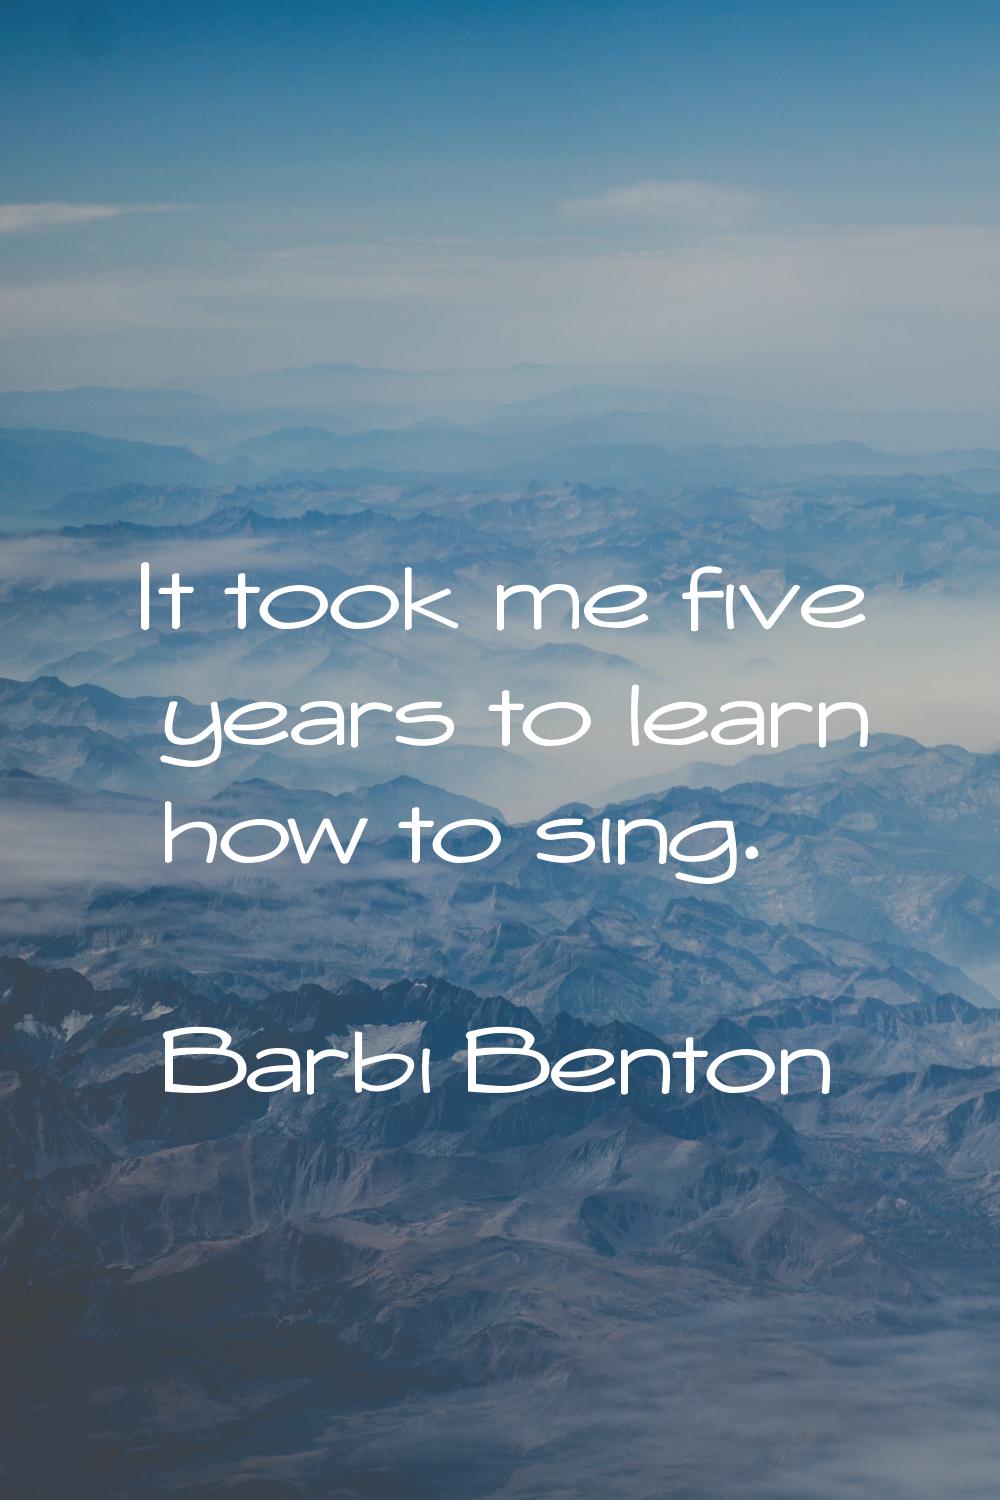 It took me five years to learn how to sing.